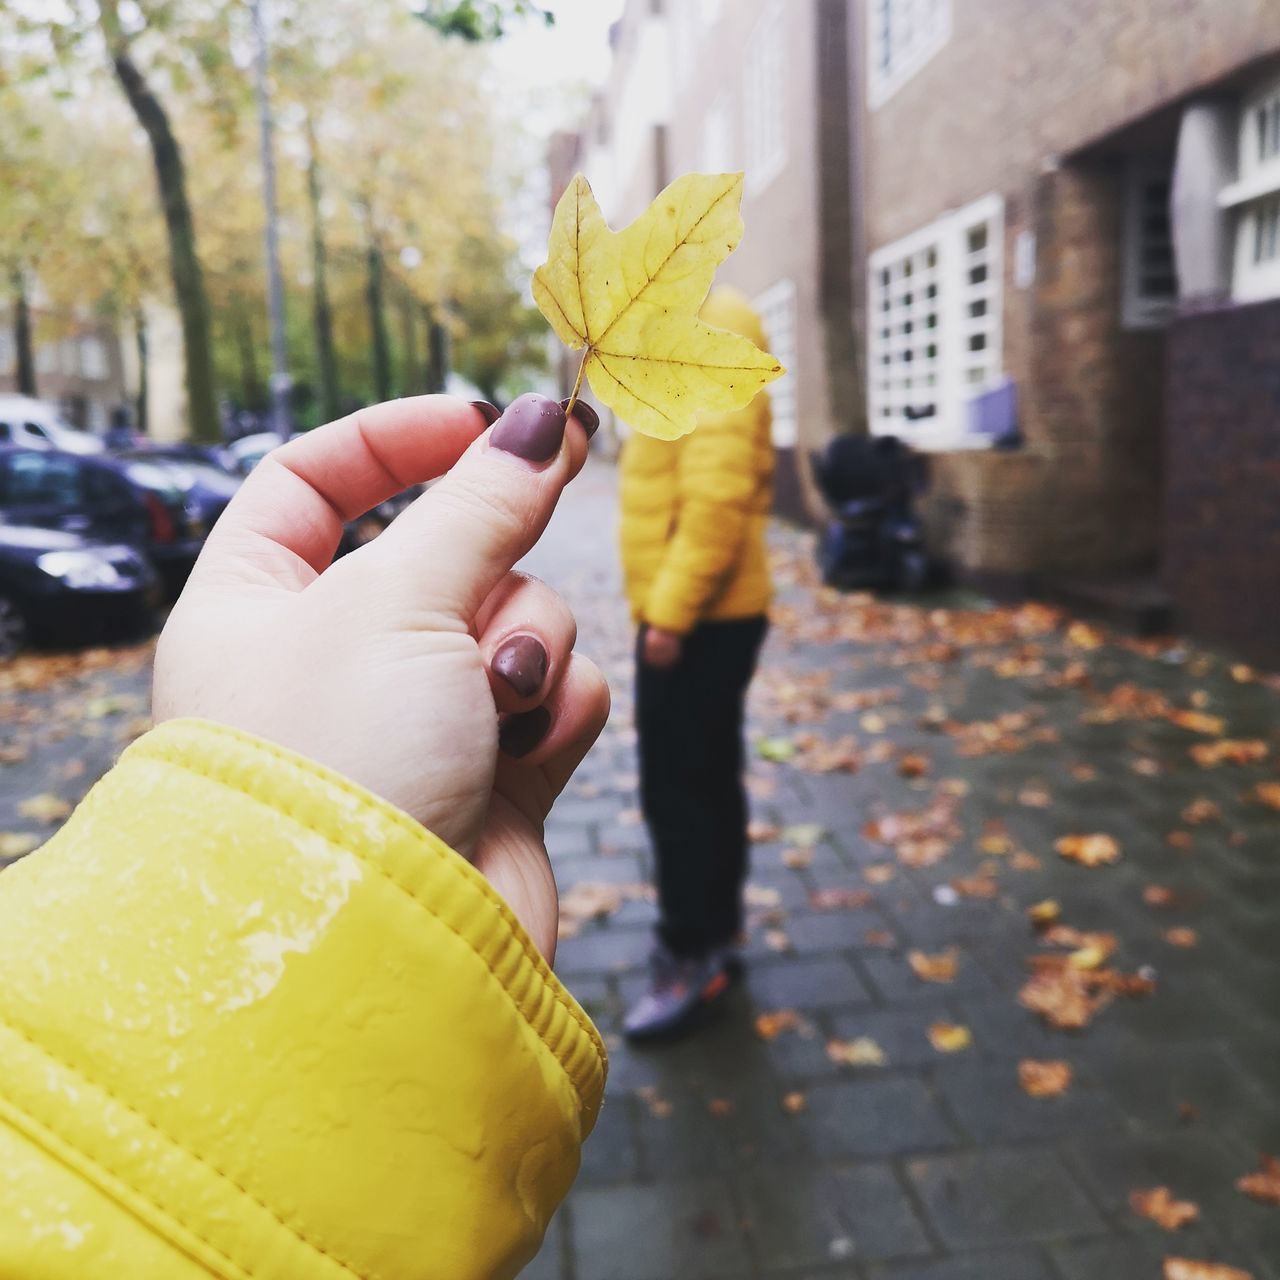 human hand, hand, yellow, real people, human body part, holding, leaf, plant part, one person, finger, lifestyles, autumn, human finger, unrecognizable person, body part, architecture, day, personal perspective, change, built structure, outdoors, human limb, leaves